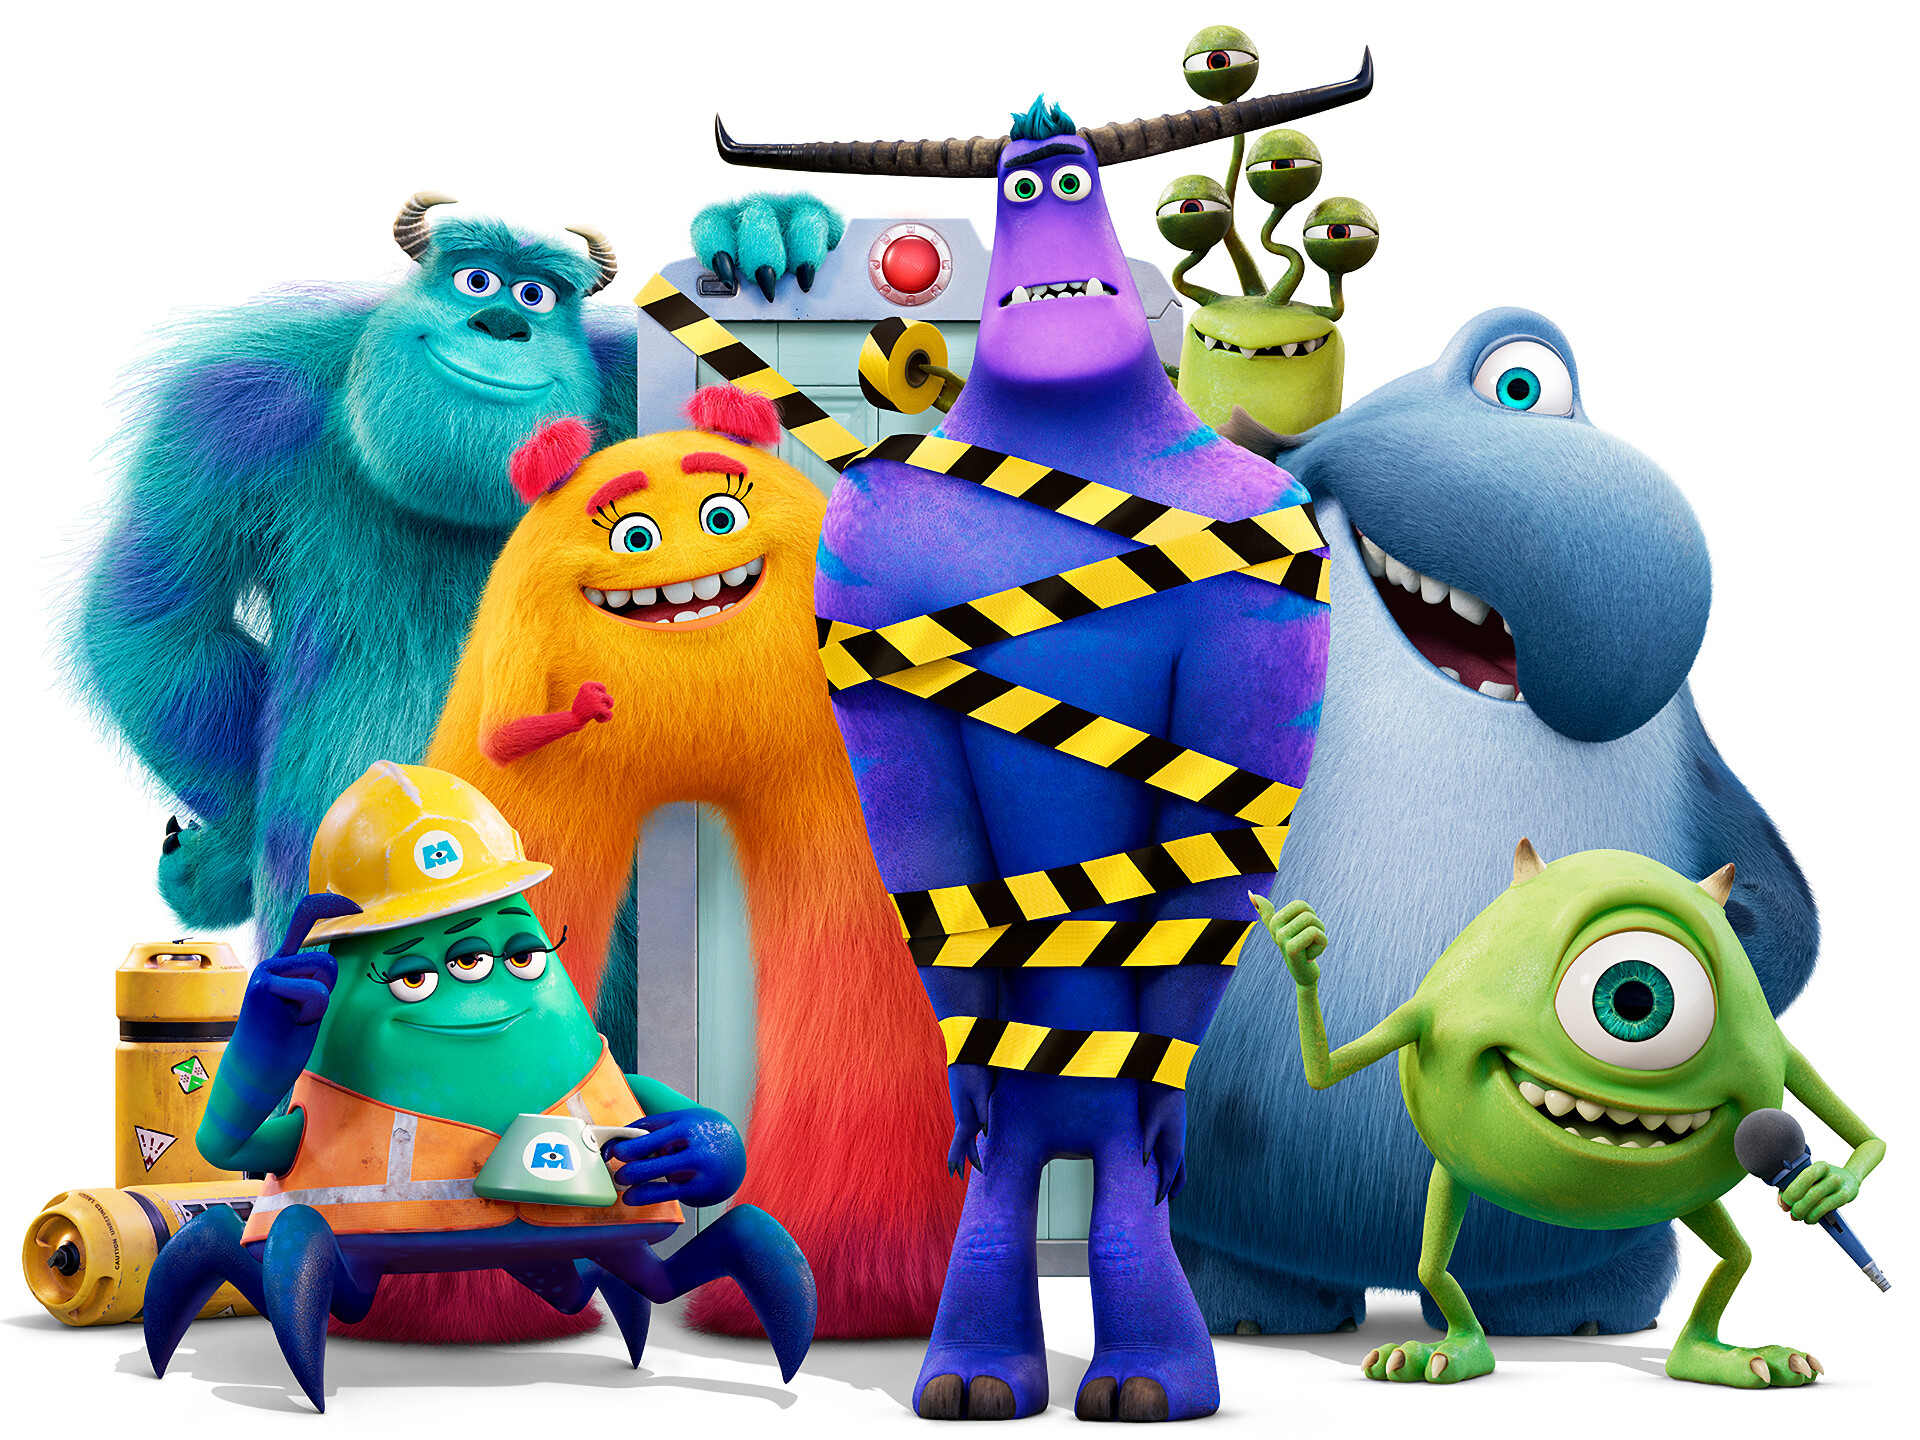 Monsters at Work, 4K Ultra HD wallpapers, Val Little Monsters Inc., Visual delight, 1920x1440 HD Desktop